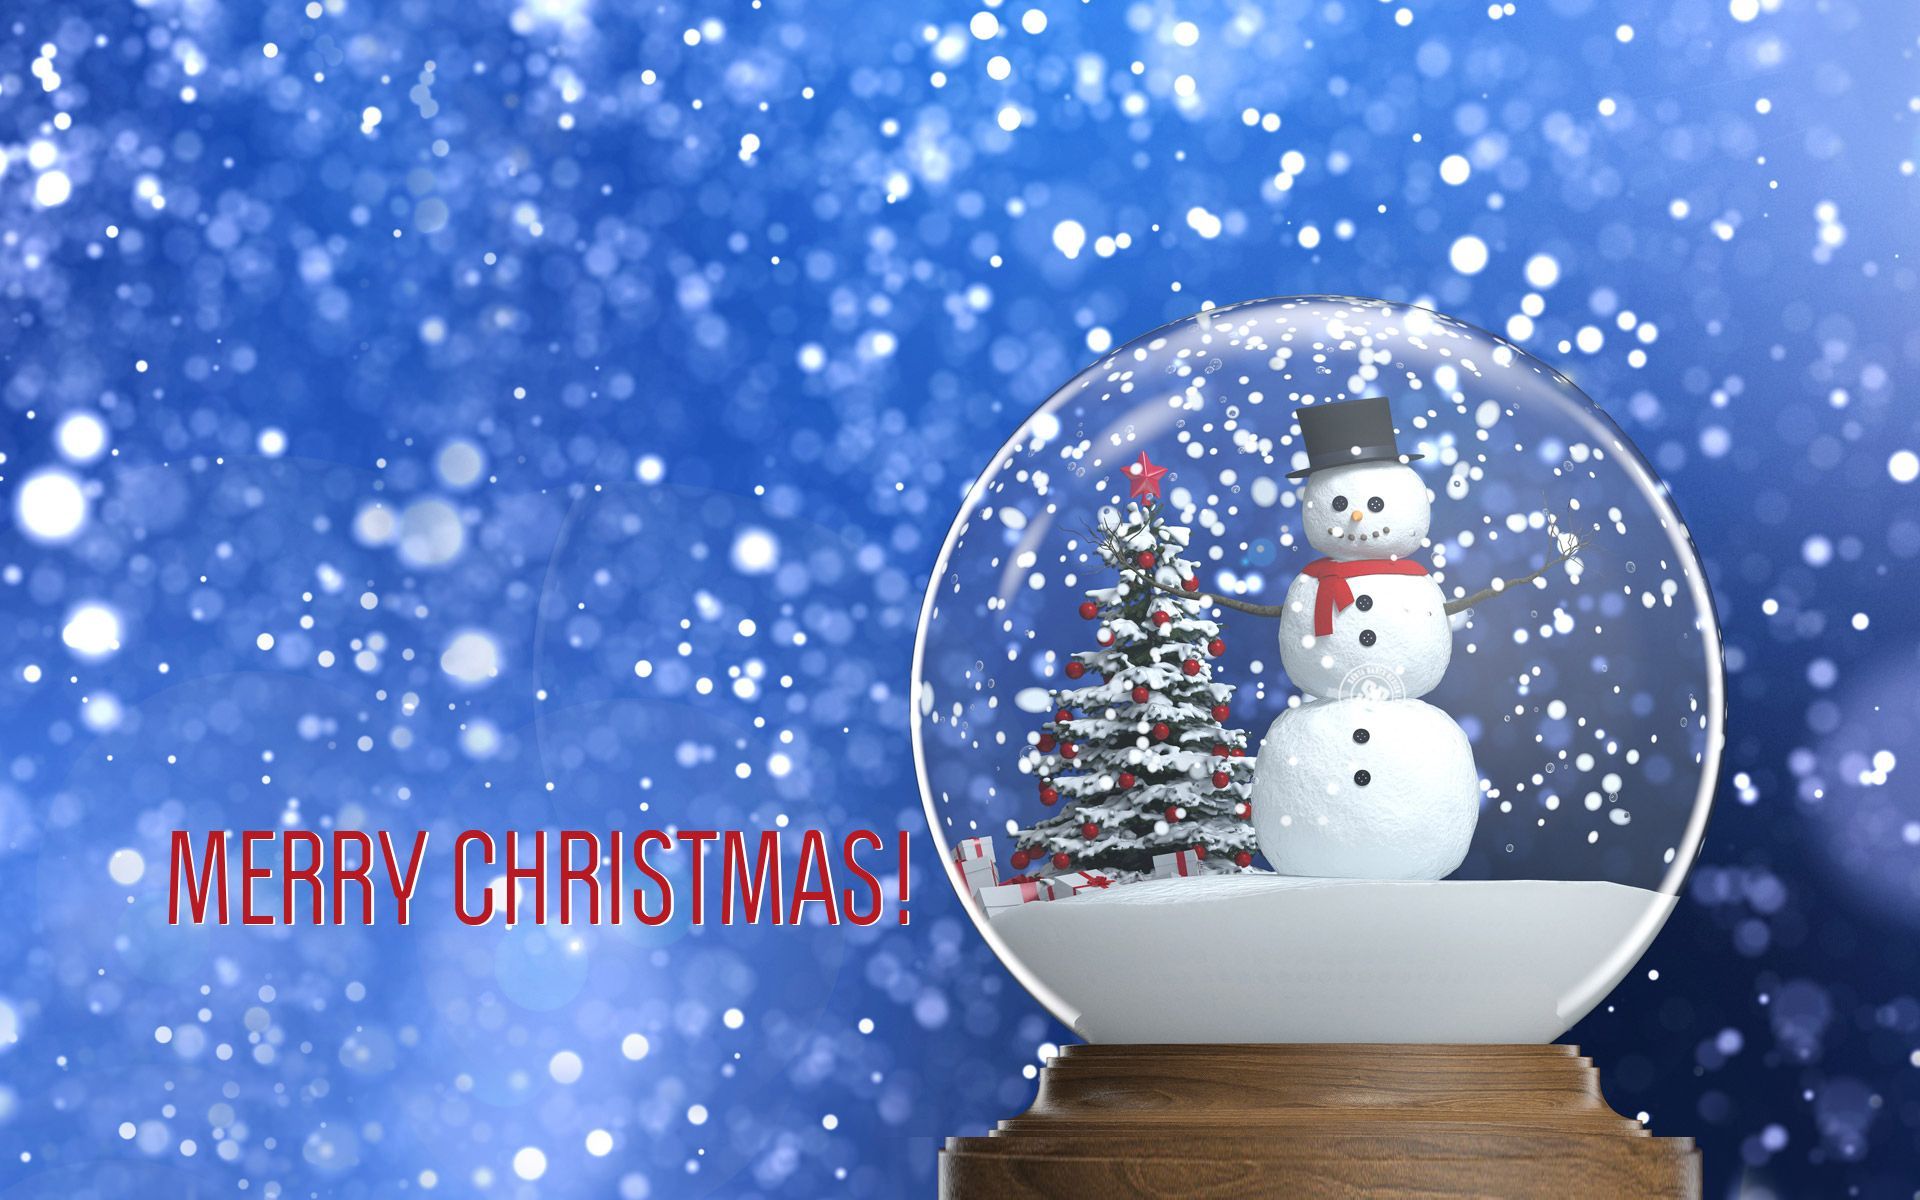 Merry Christmas Image Wallpaper Quotes. Merry christmas wishes image, Merry christmas image, Merry christmas wallpaper